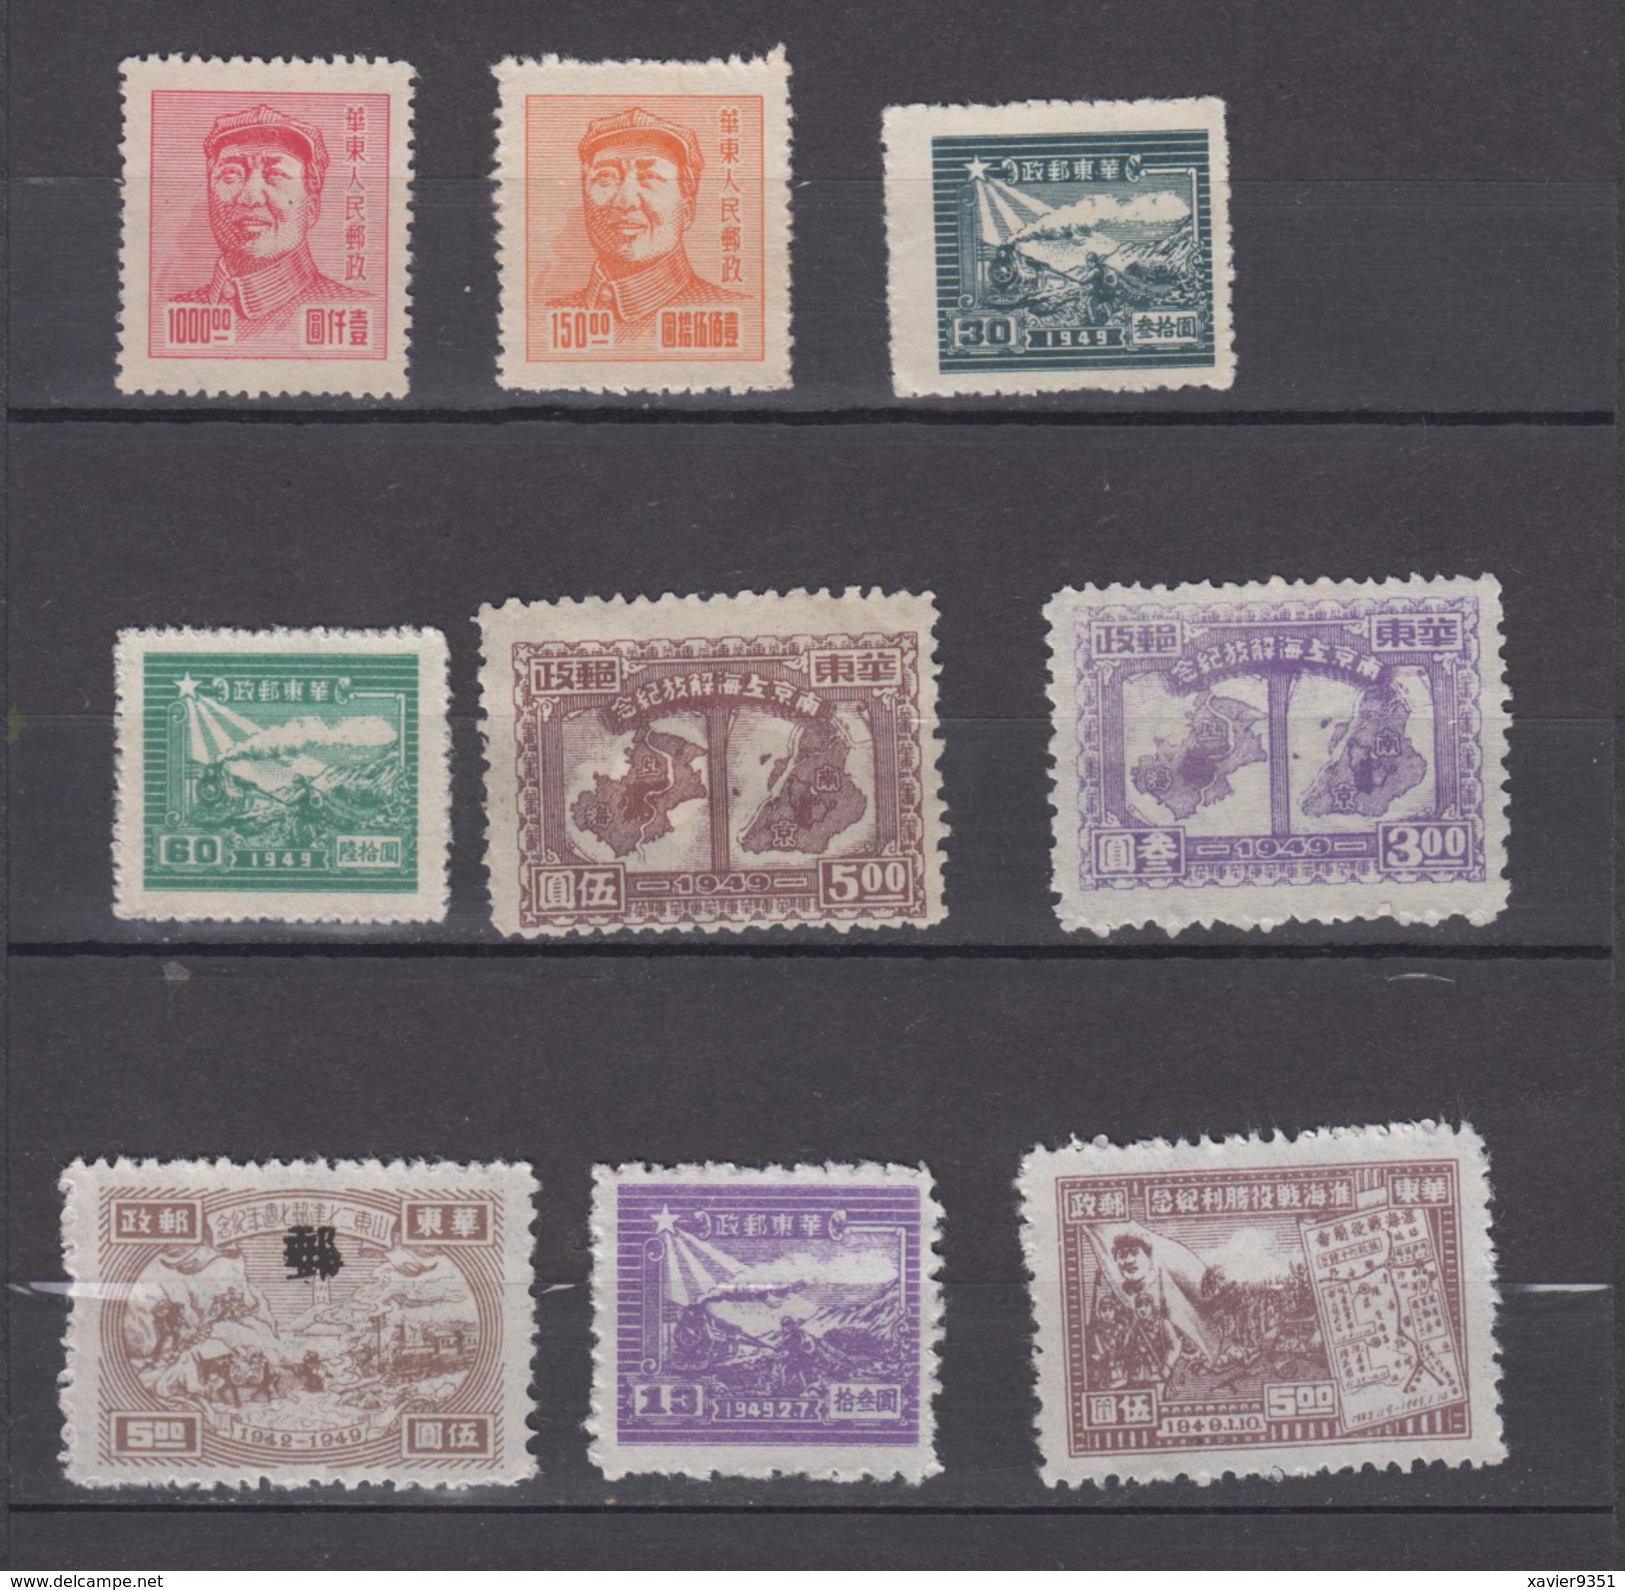 LOT DE TIMBRES  CHINE ORIENTALE - Western-China 1949-50